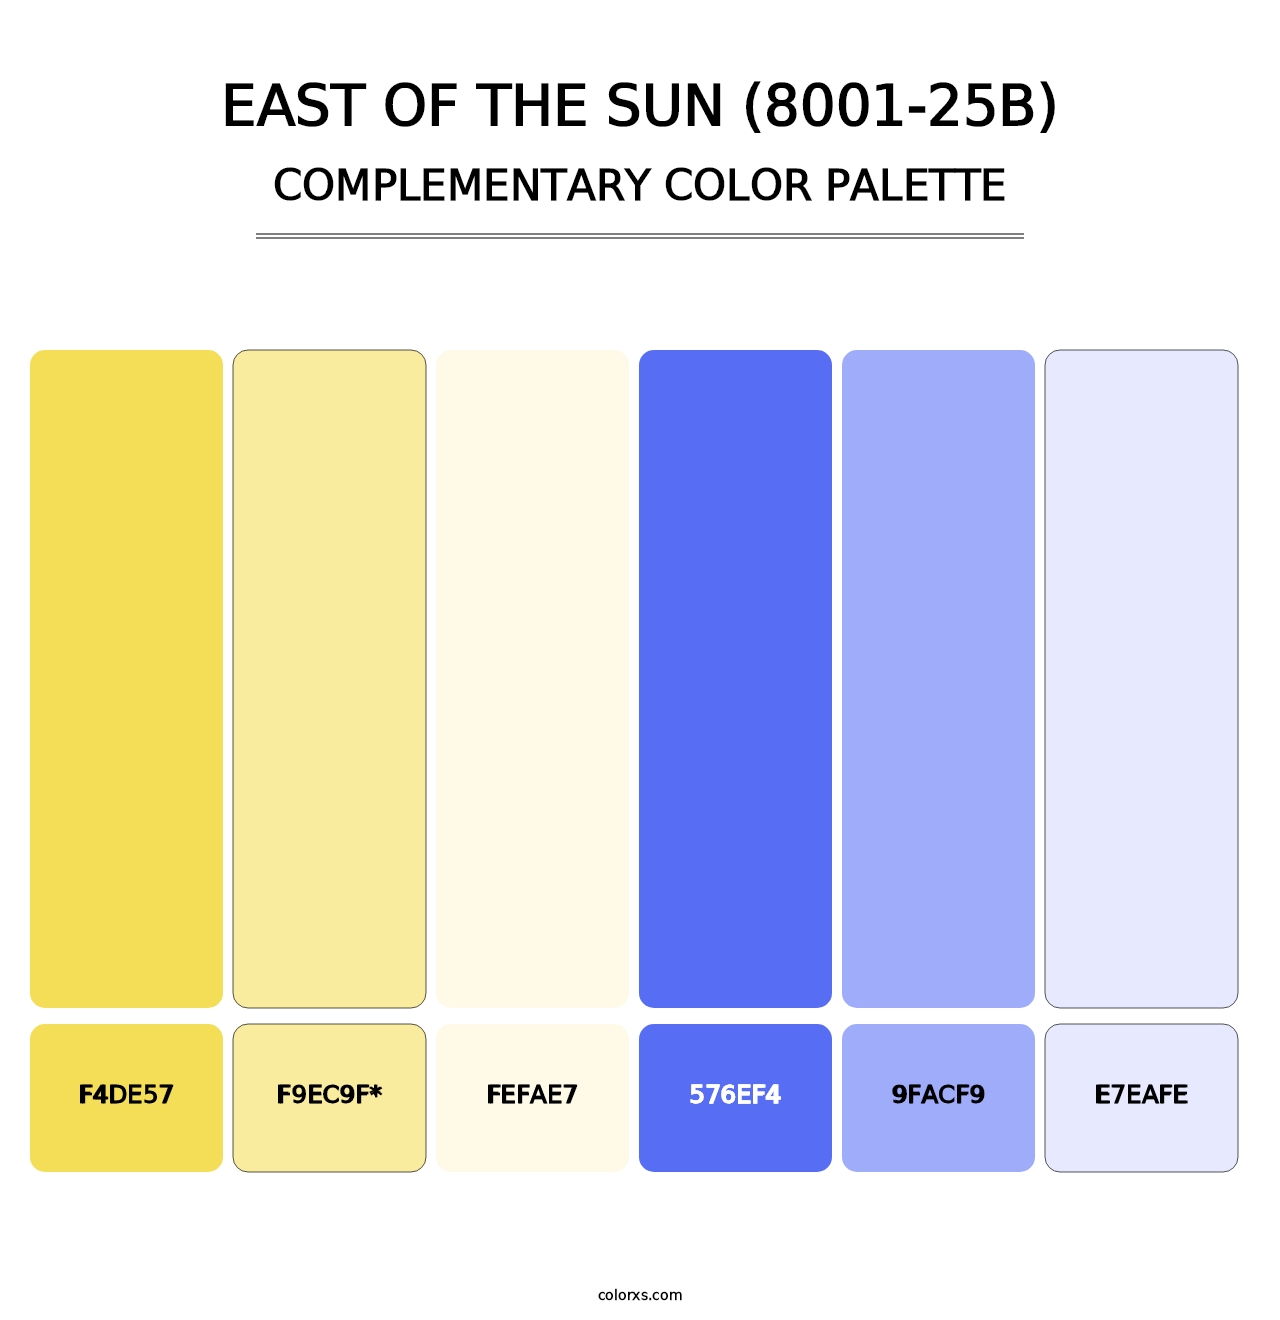 East of the Sun (8001-25B) - Complementary Color Palette